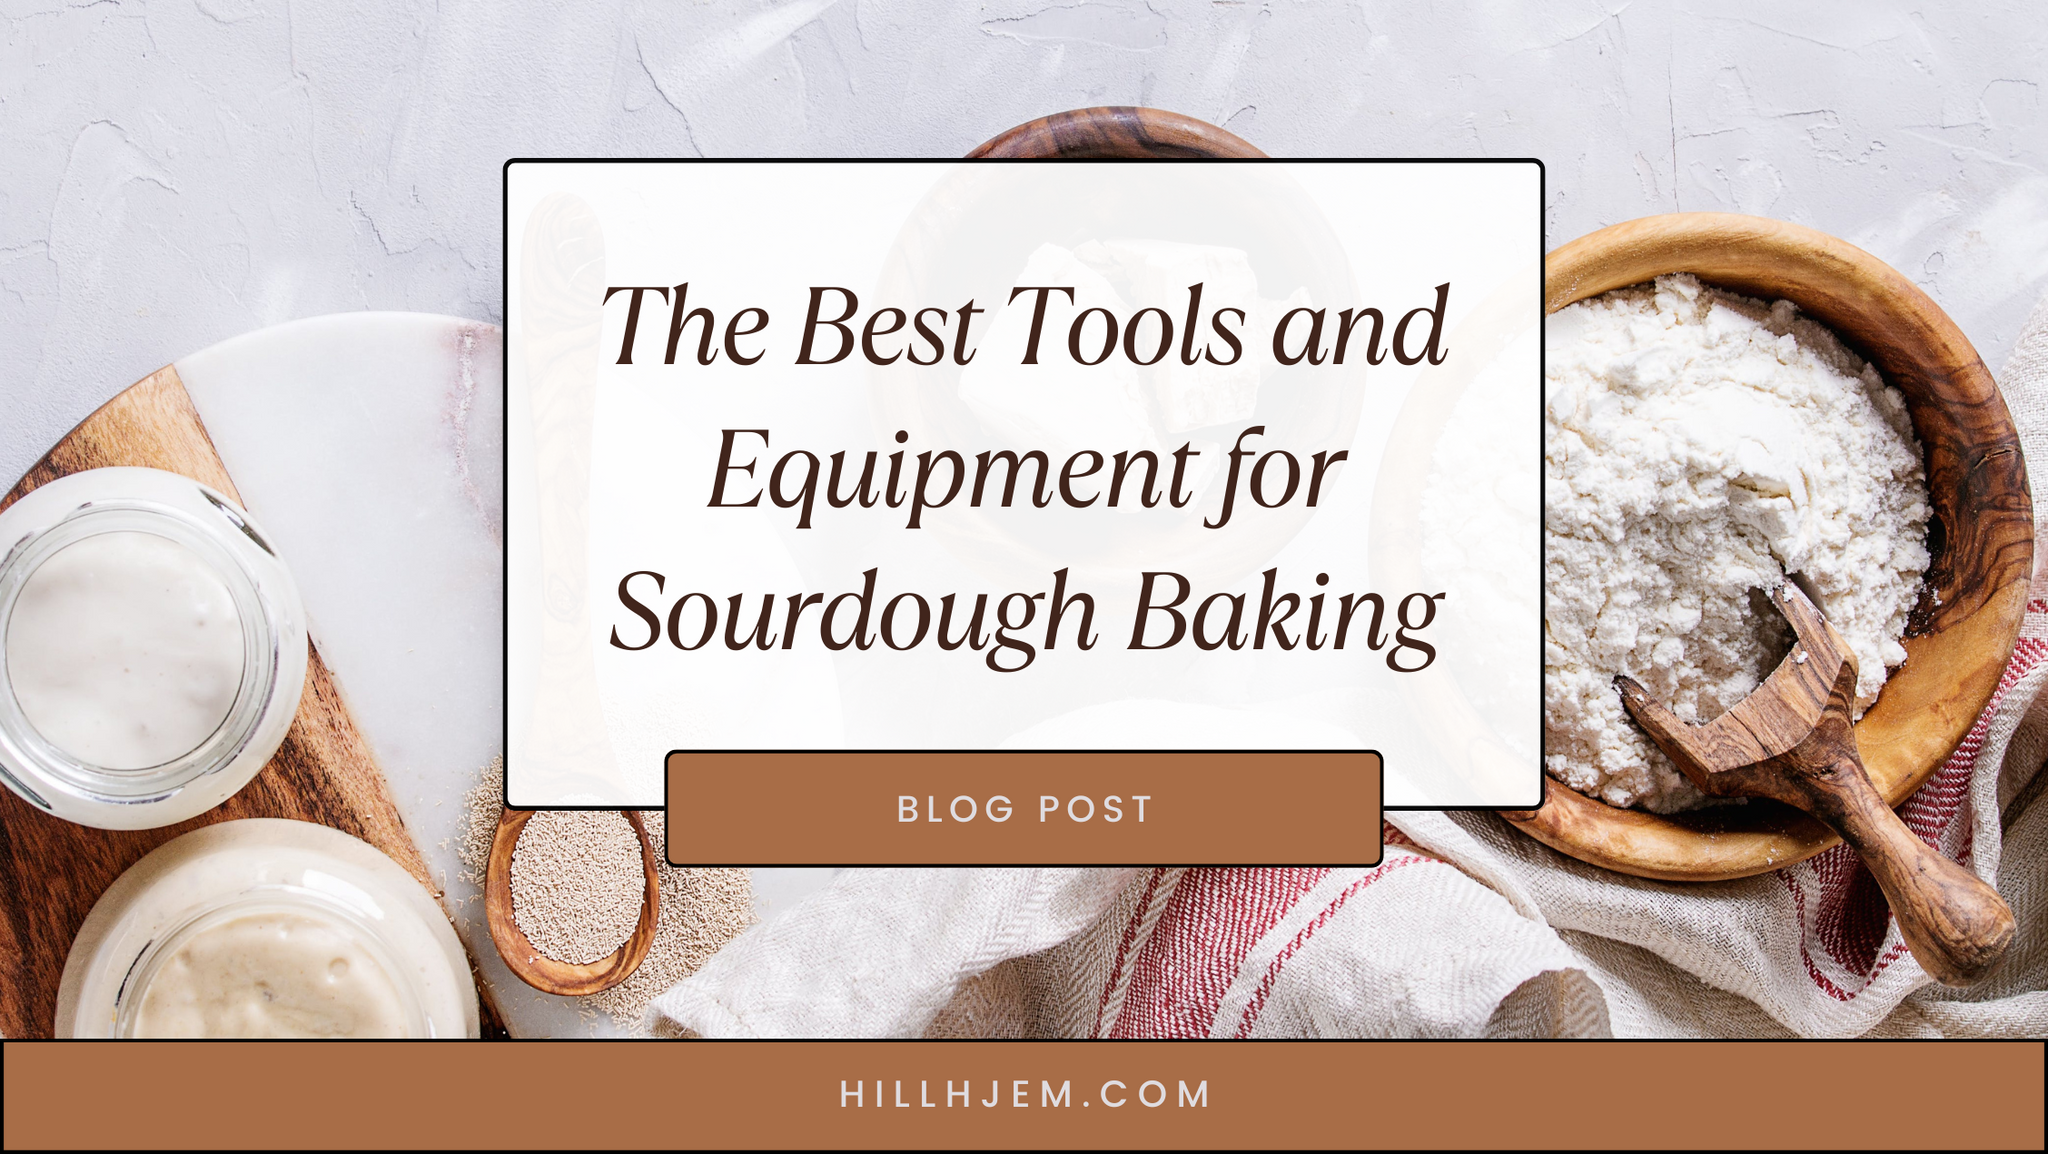 The Best Tools and Equipment for Sourdough Baking